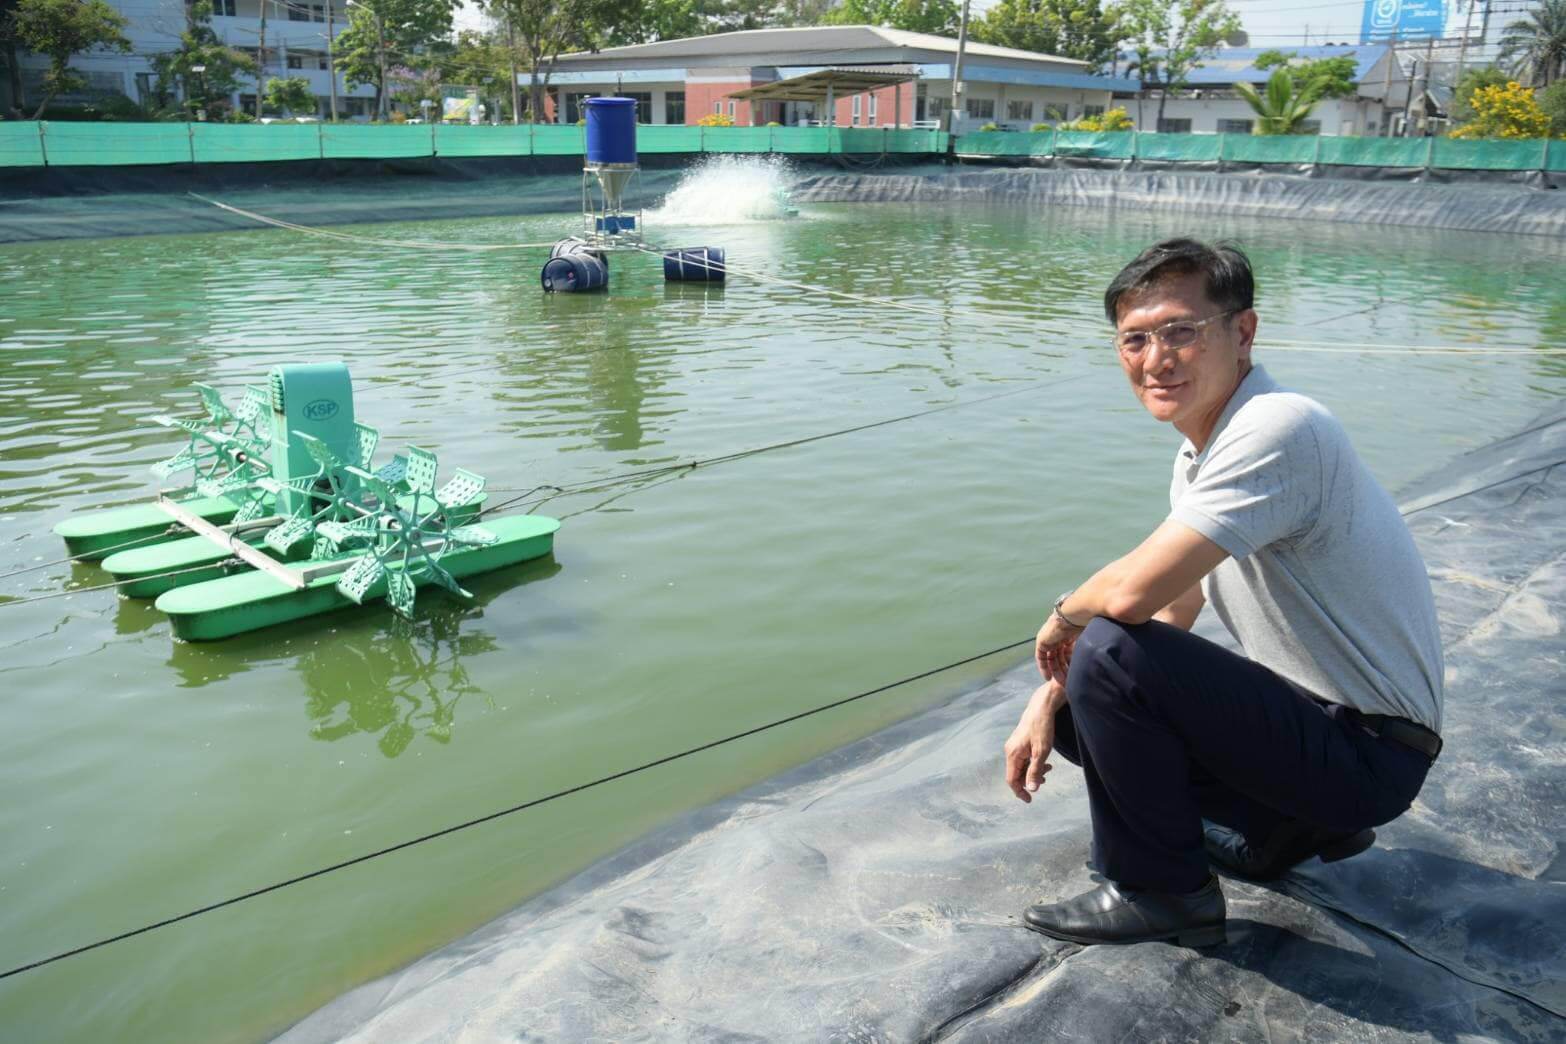 CP Foods shares expertise on a sustainable fish farming to small-scale farmers